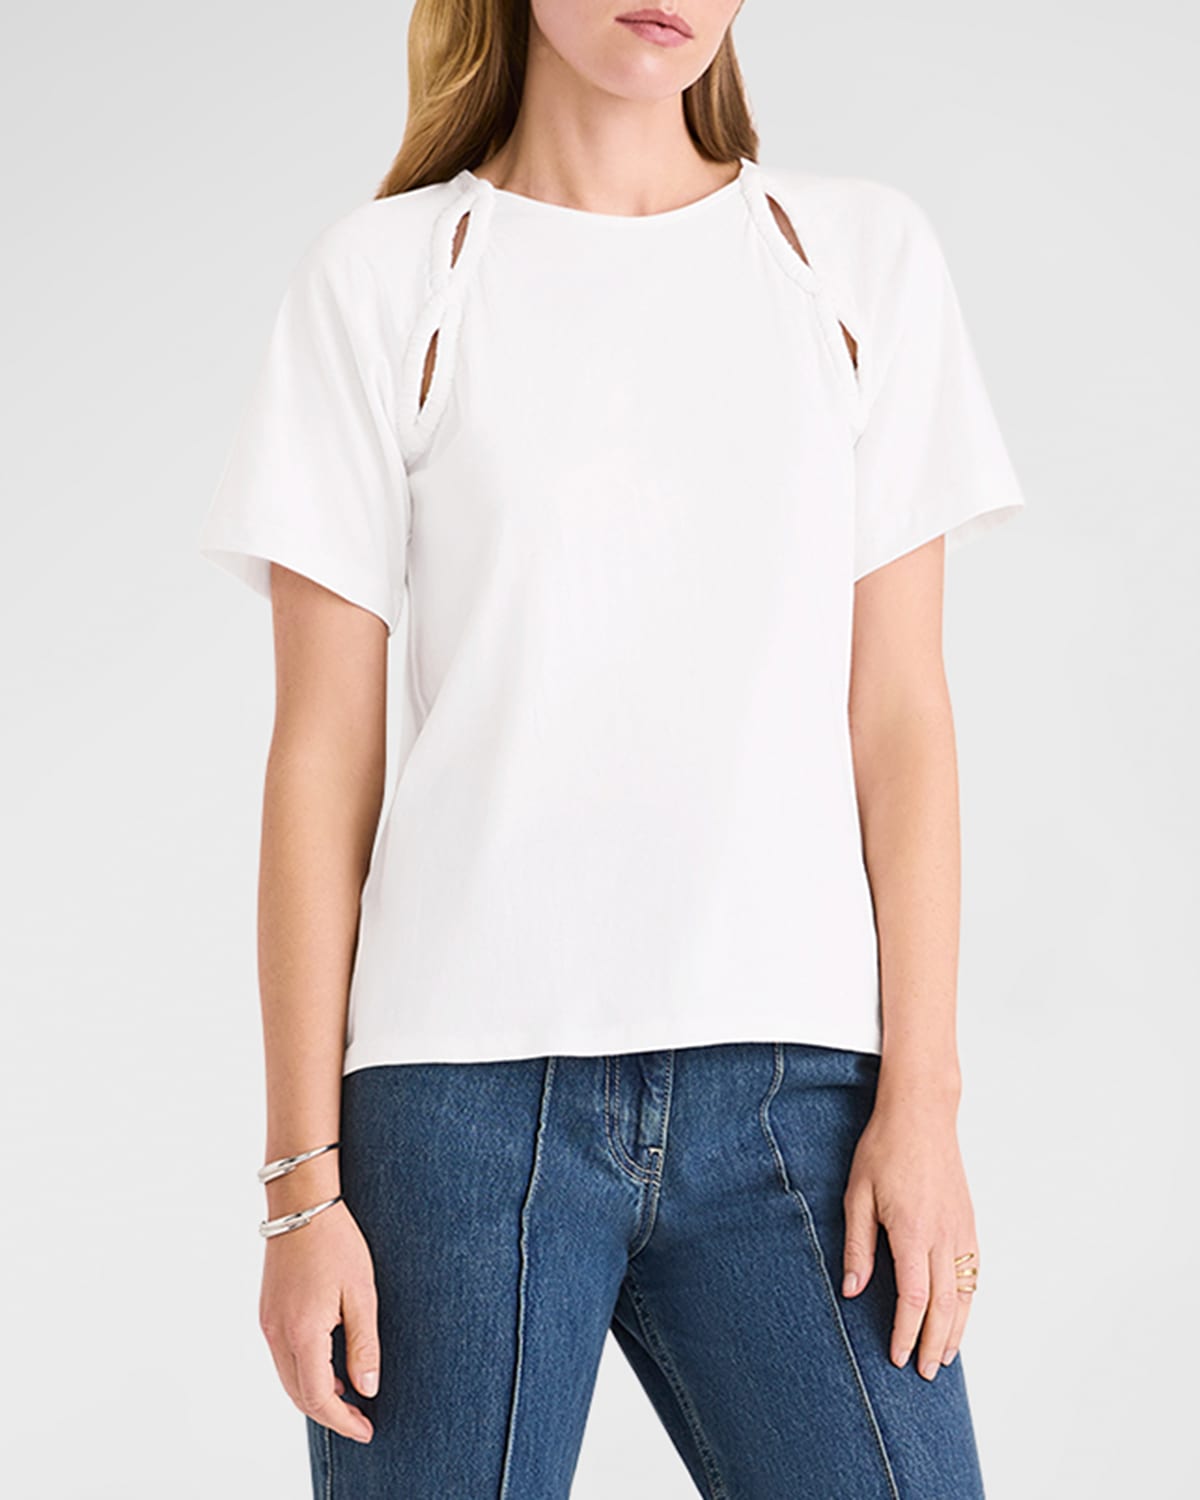 Merlette Solace Cutout Jersey Top In White